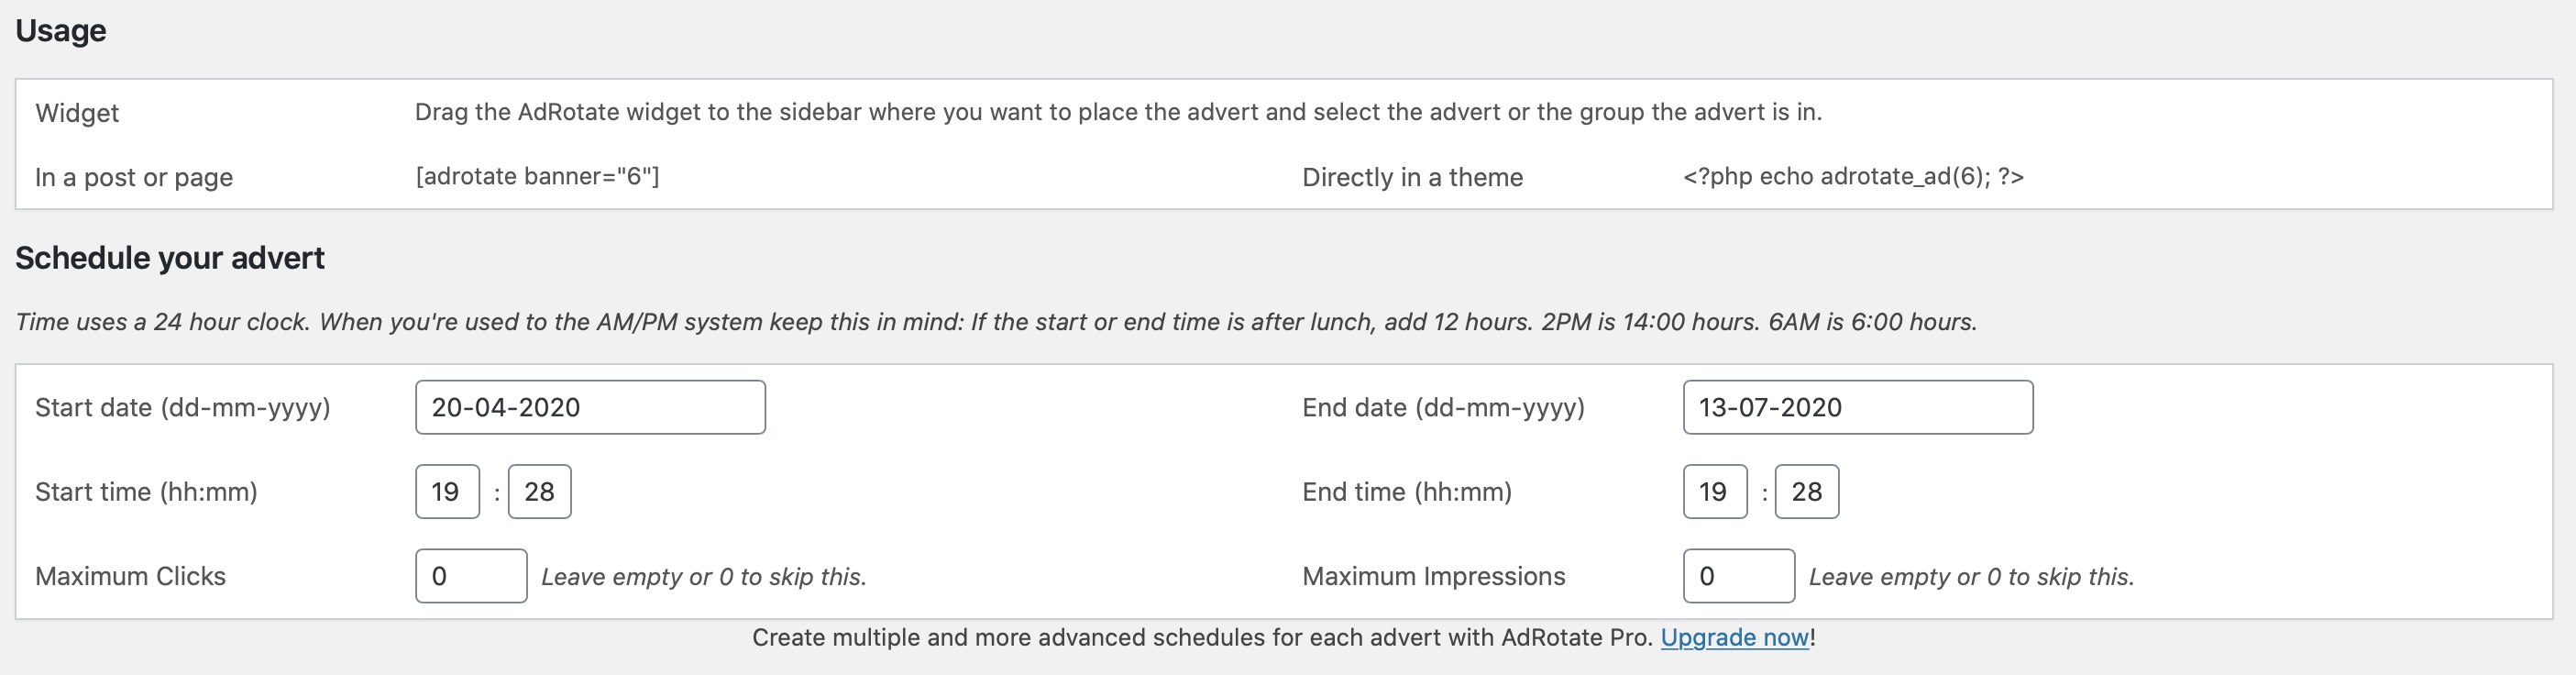 Schedule you advert to the minute with AdRotate